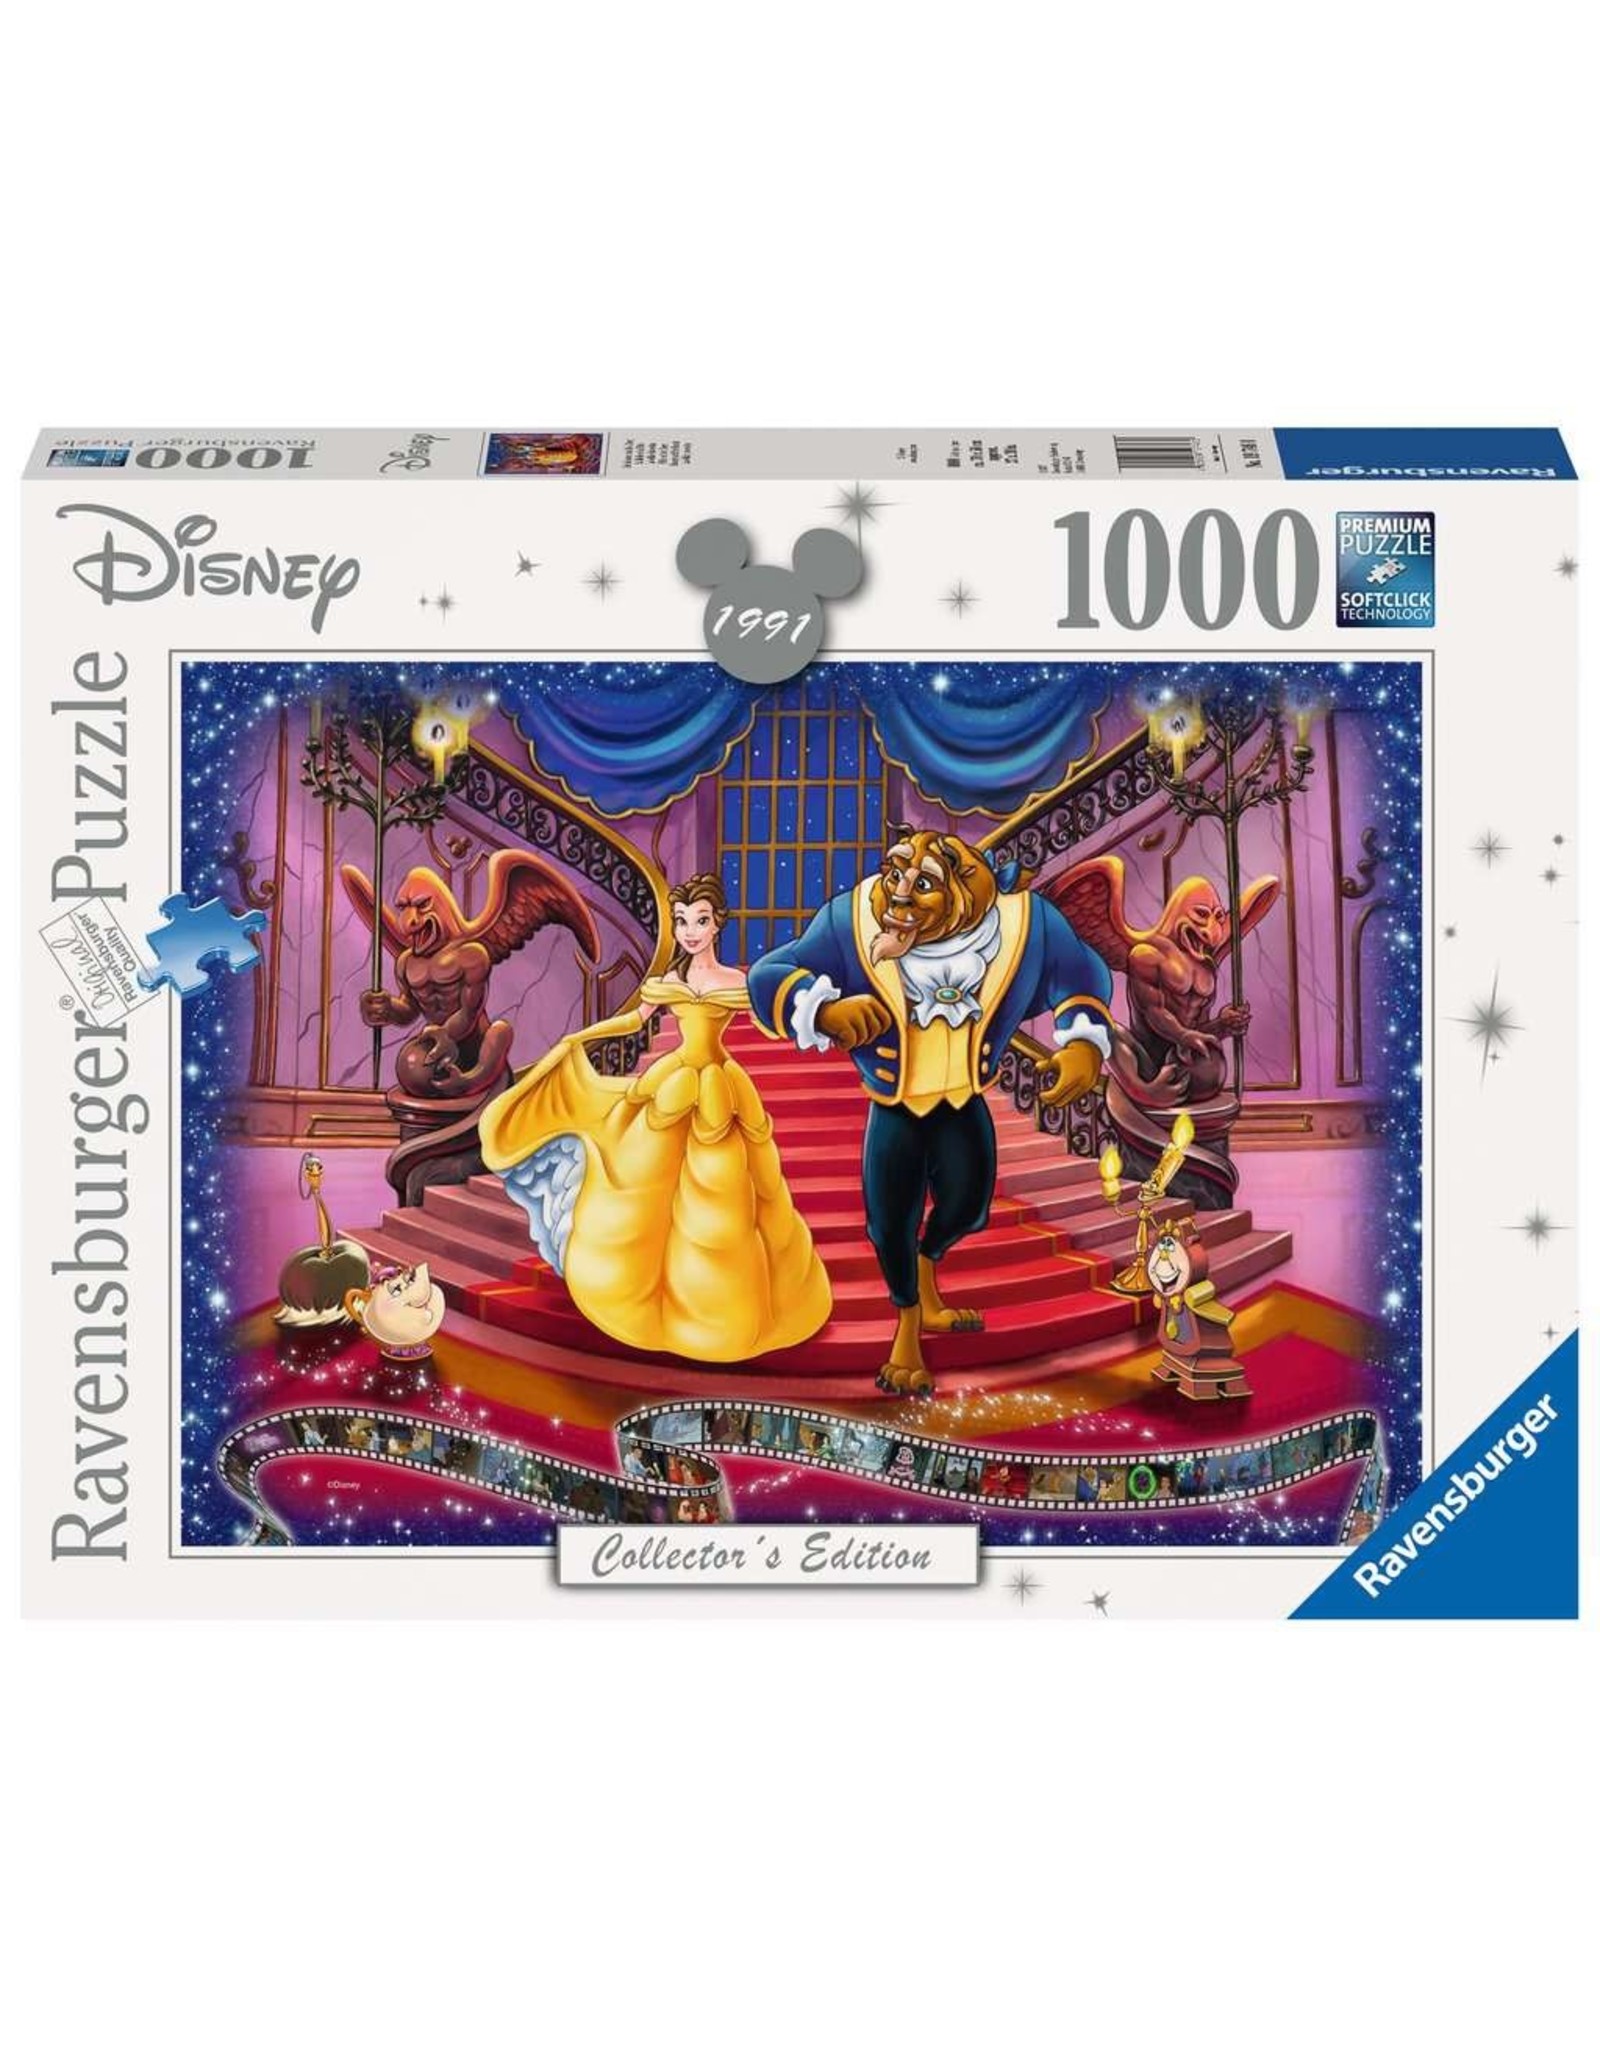 Ravensburger 1000 pcs. Beauty and the Beast Puzzle